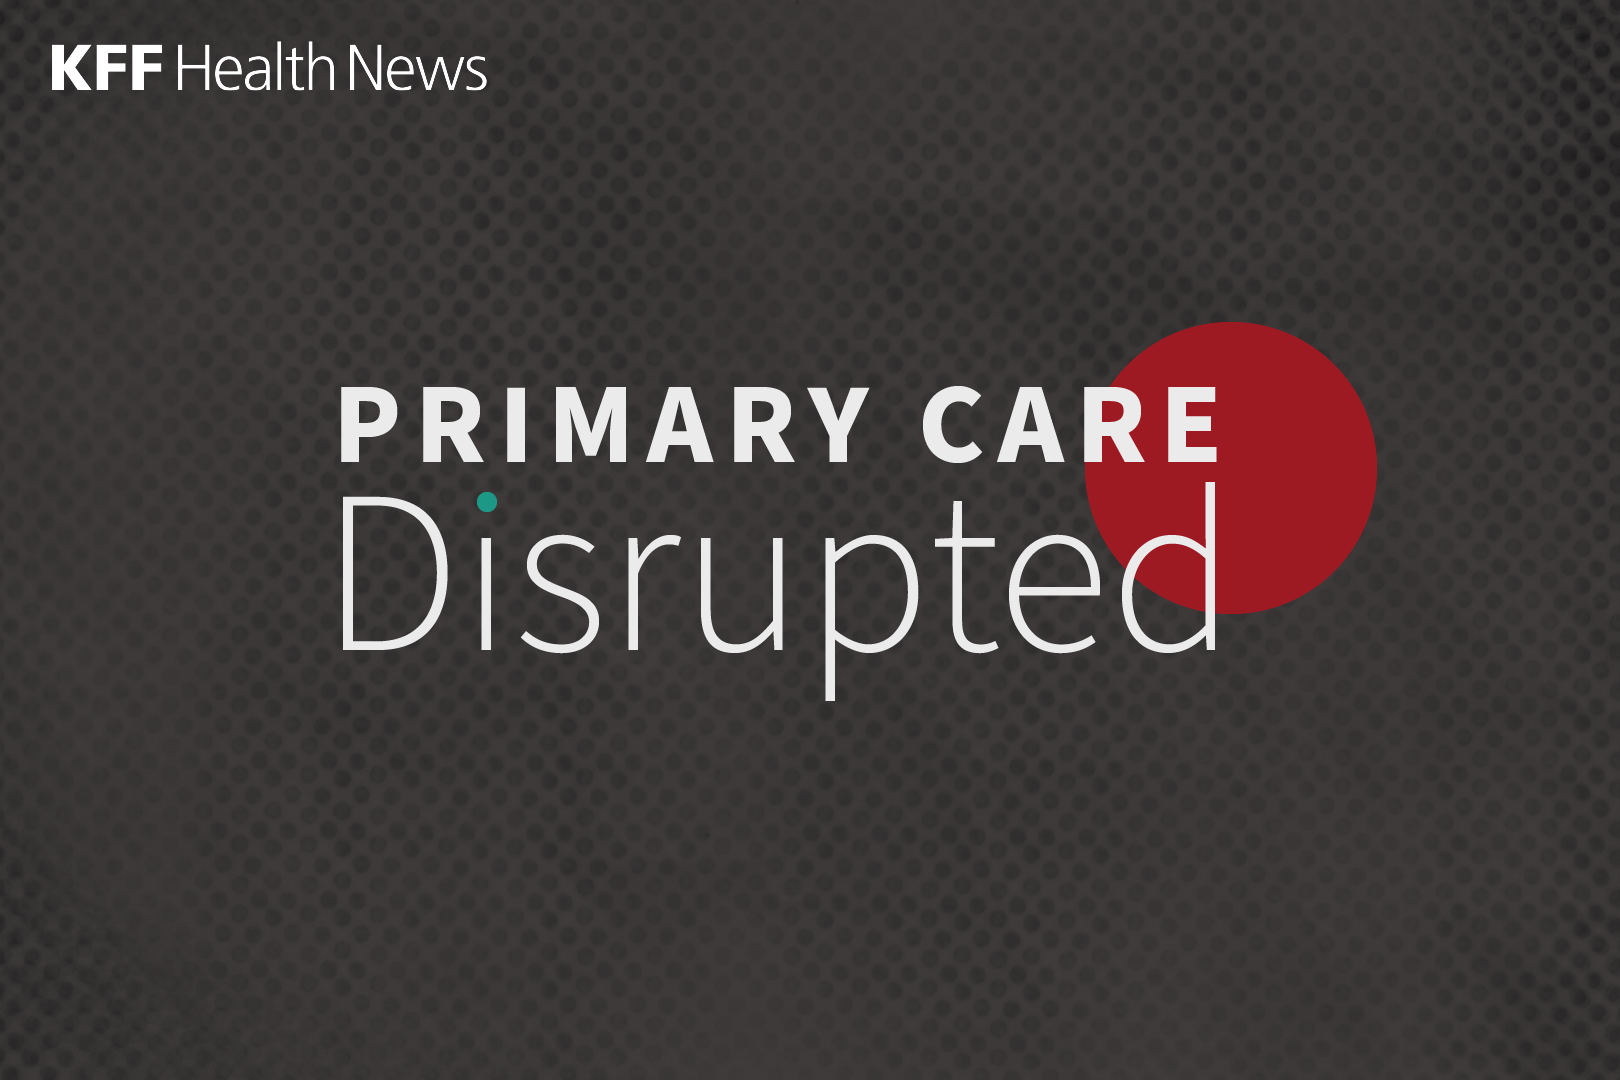 A Video Introduction to the Disruption of Primary Care